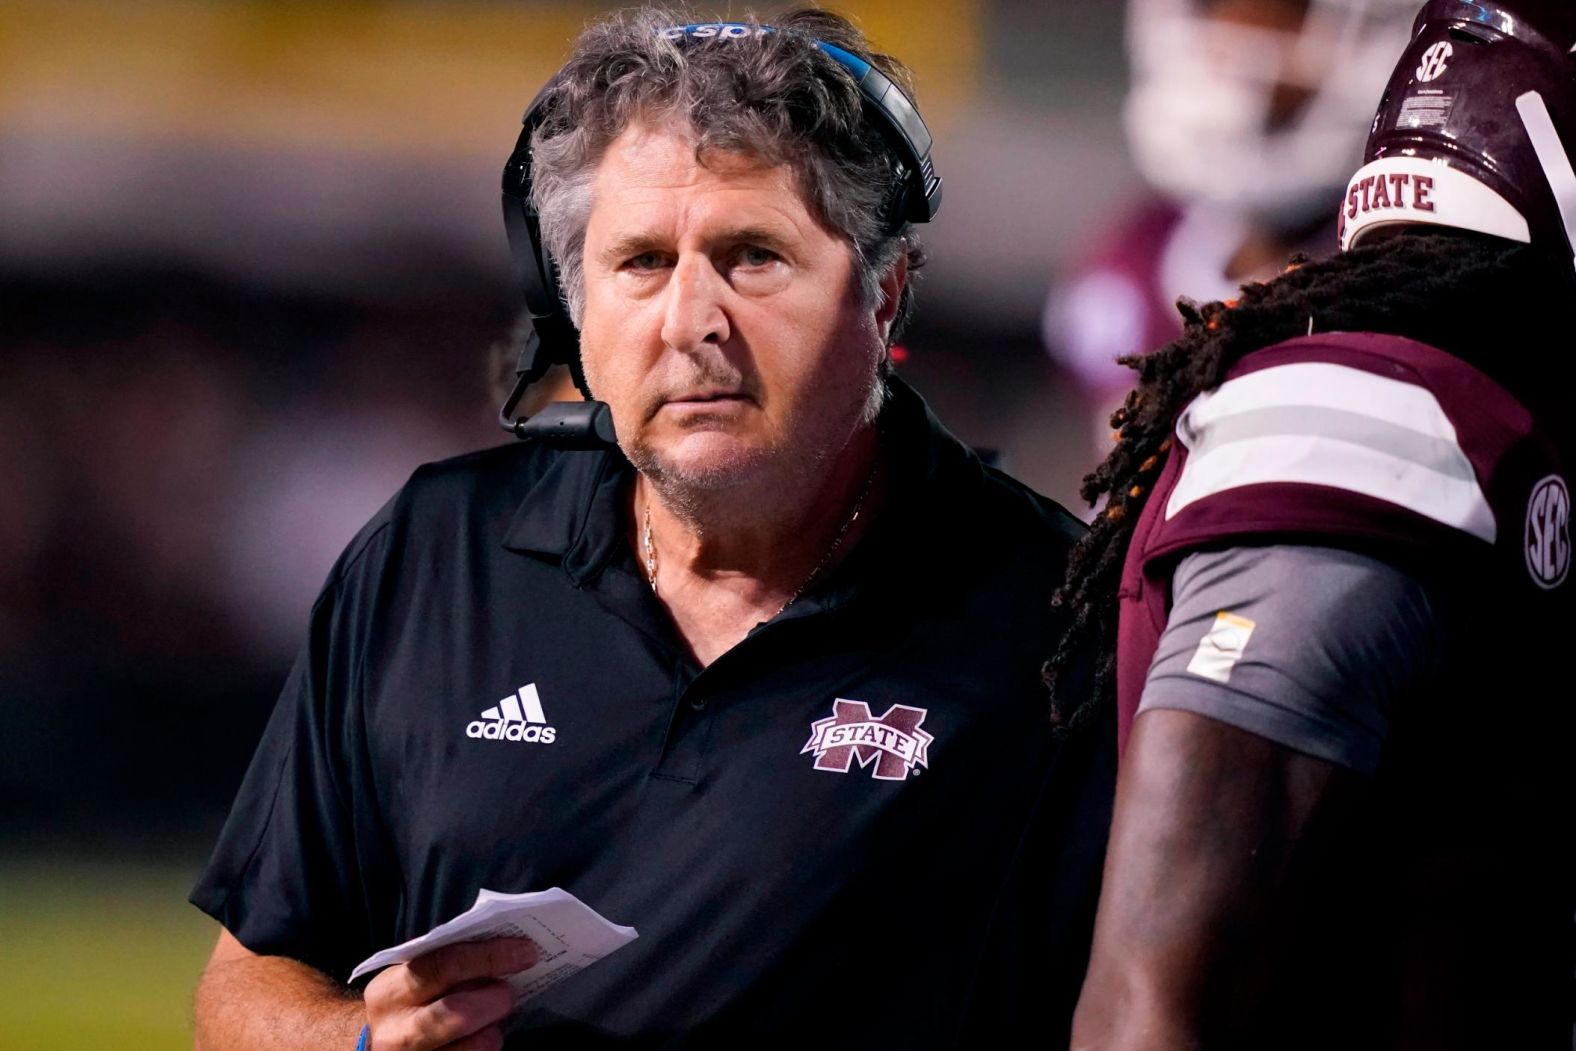 Mississippi State head football coach <a href="index.php?page=&url=https%3A%2F%2Fwww.cnn.com%2F2022%2F12%2F13%2Fsport%2Fmike-leach-death-mississippi-state-spt-intl%2Findex.html" target="_blank">Mike Leach</a> died from heart condition complications, the university announced on December 13. He was 61.